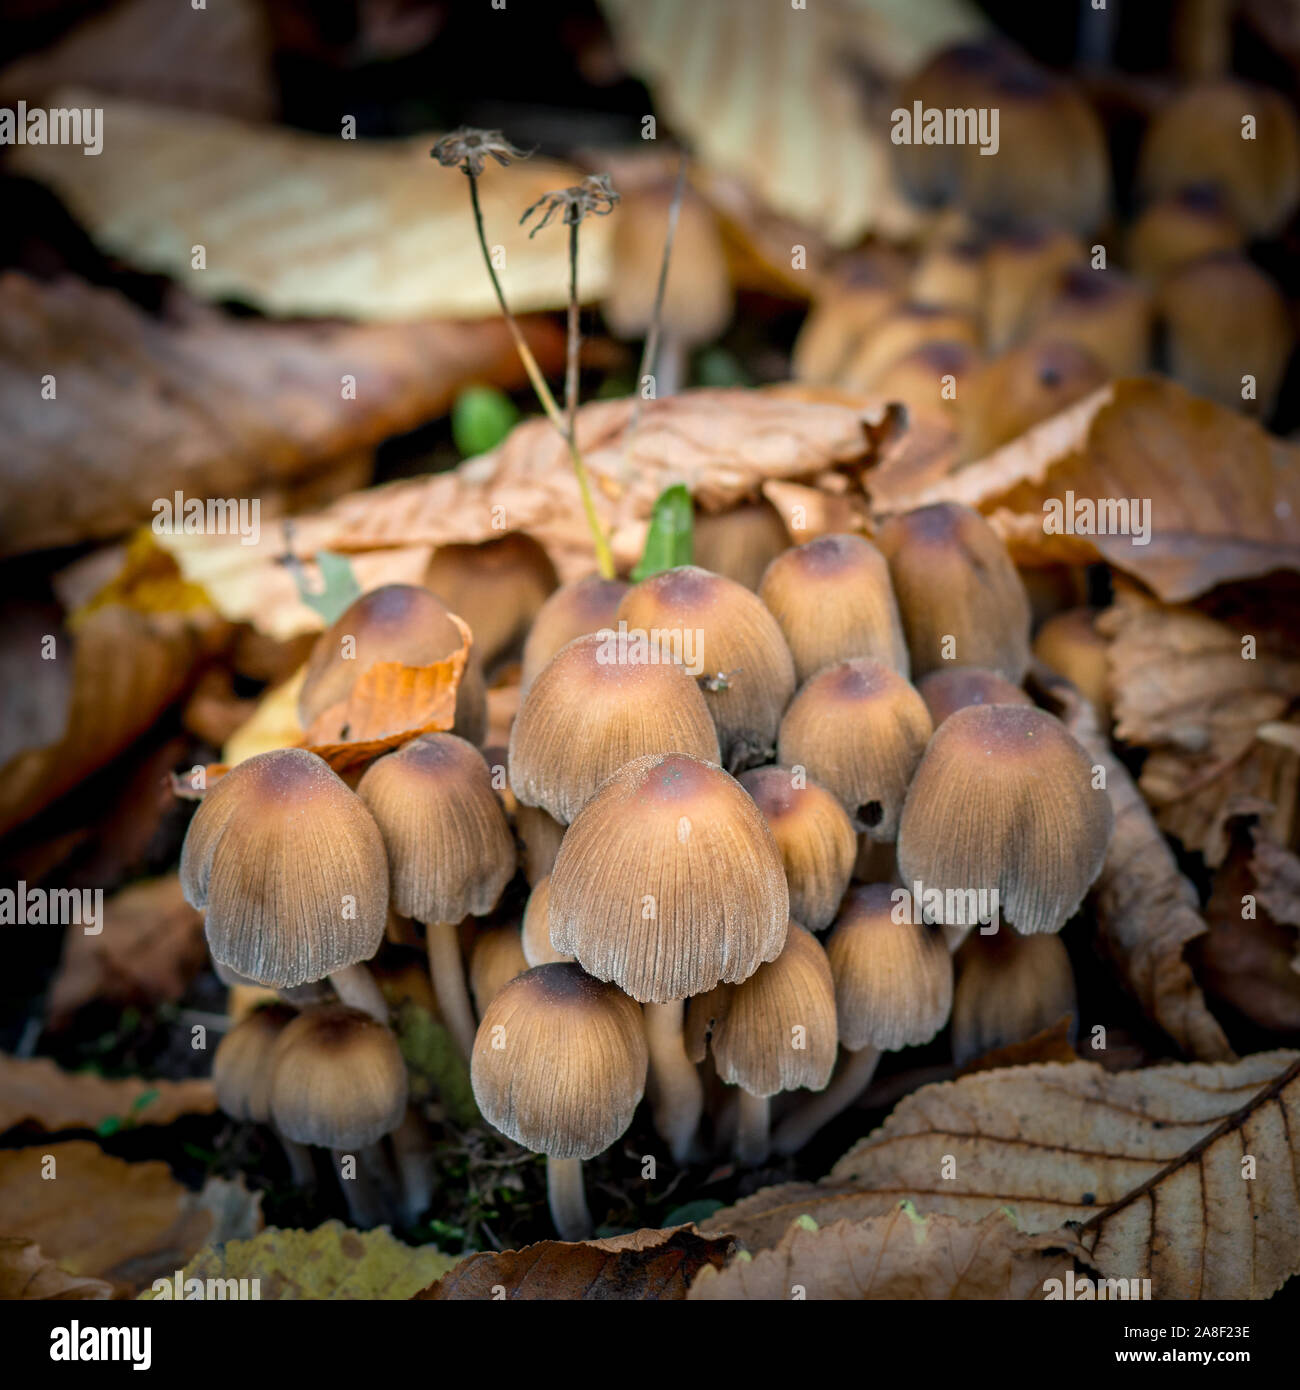 Mushrooms growing in the grass. Poisonous mushrooms. Stock Photo